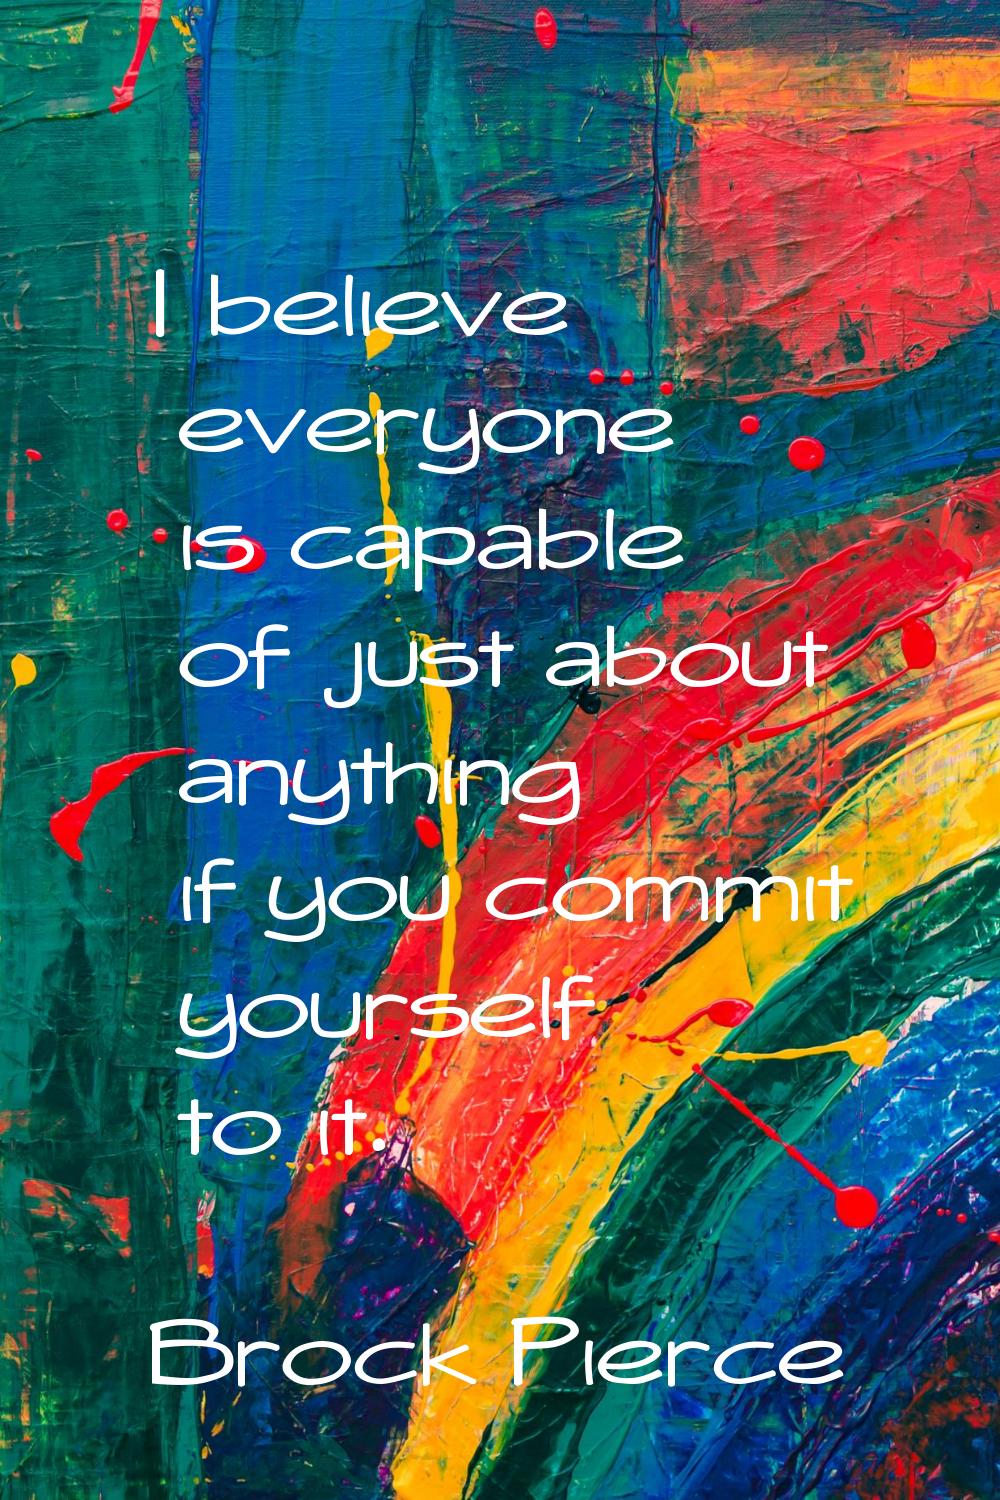 I believe everyone is capable of just about anything if you commit yourself to it.